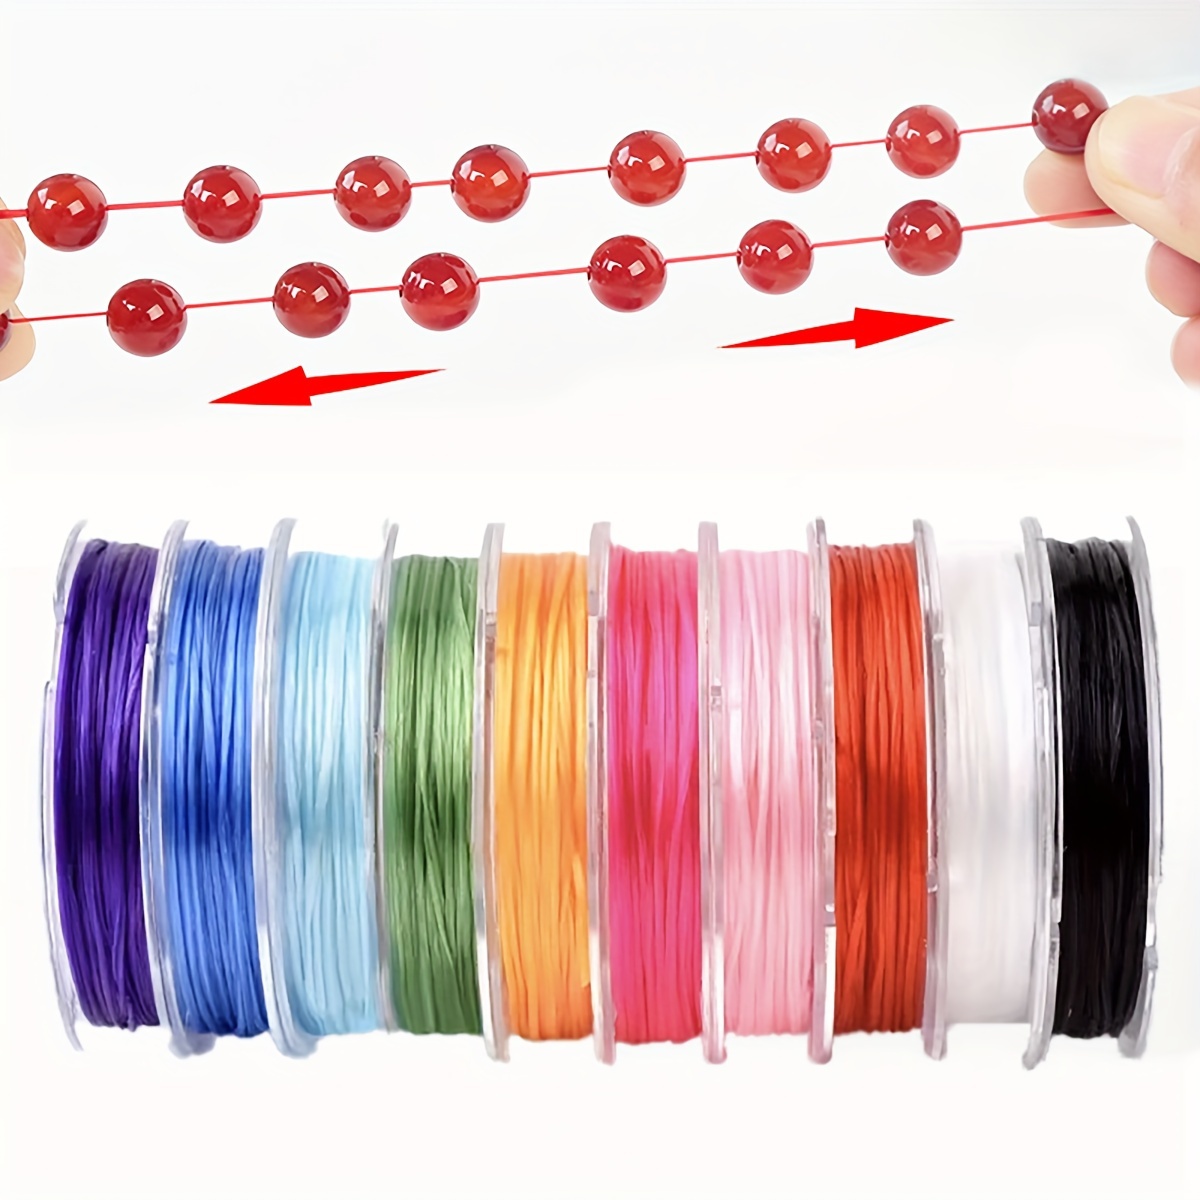 The Hobbyworker 10 Colors Elastic String Set, 10 Yards Roll, Stretchy  String For Bracelets, Elastic Thread For Jewelry Making, Beading, Necklace  And Craft Supplies